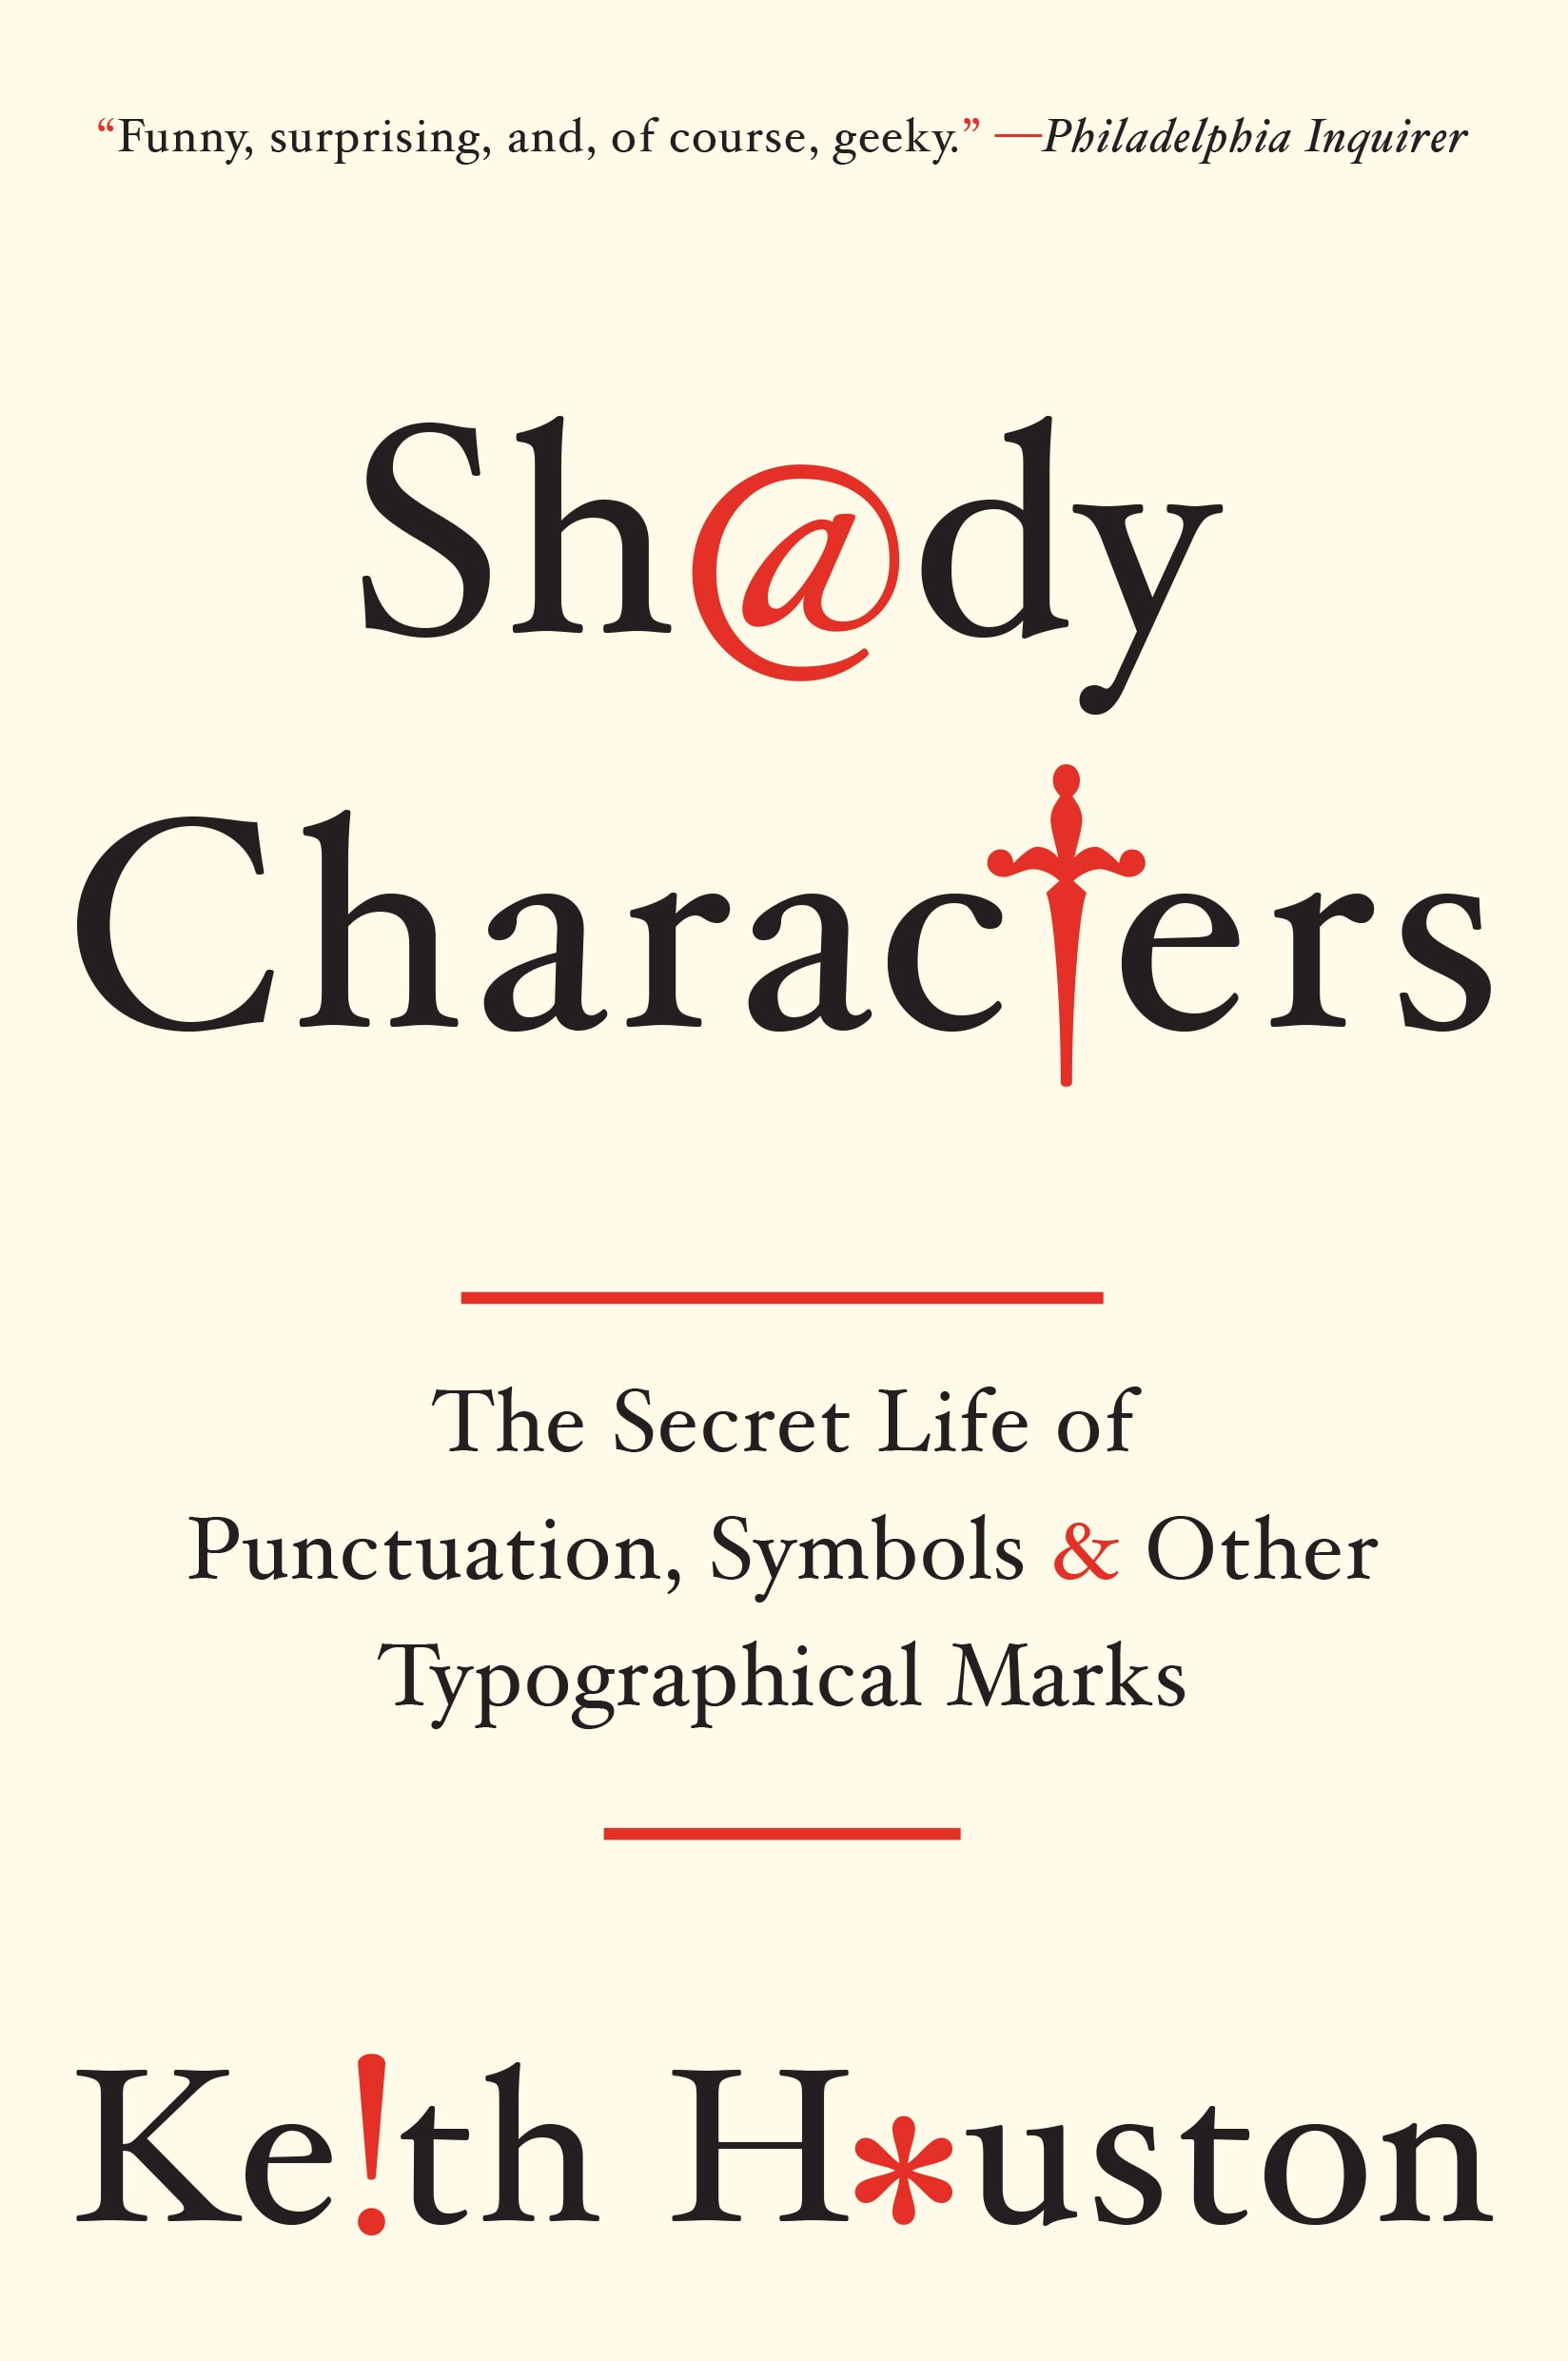 Shady Characters paperback (W. W. Norton., 2014).